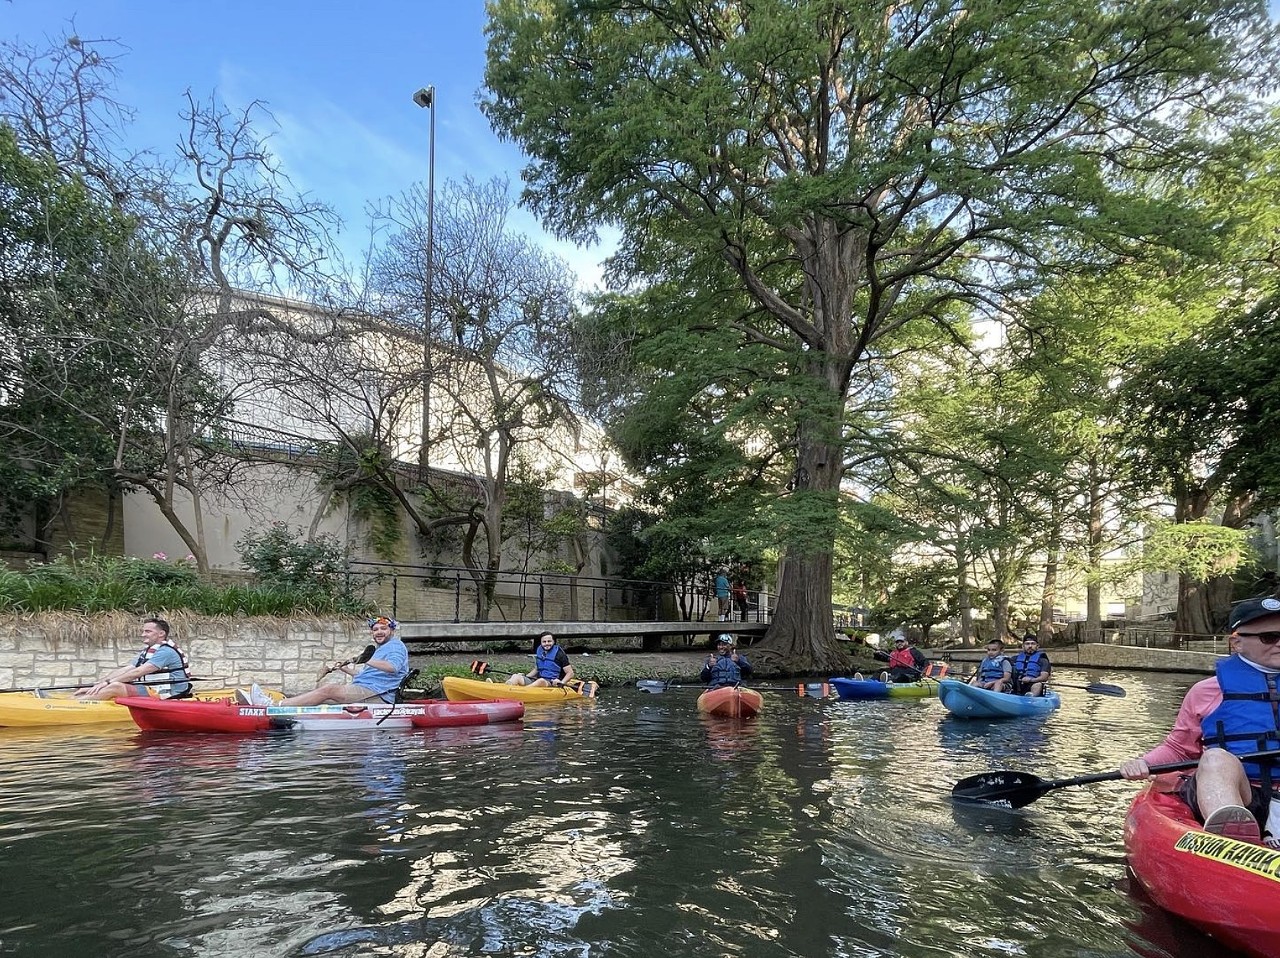 Kayak the San Antonio River
Looking for a new point of view? Eschew the sidewalk and paddle down scenic stretches of the river downtown instead. Mission Kayak provides guided and unguided kayak rentals from March through October, or you can take your own kayak to paddle select parts of the river!